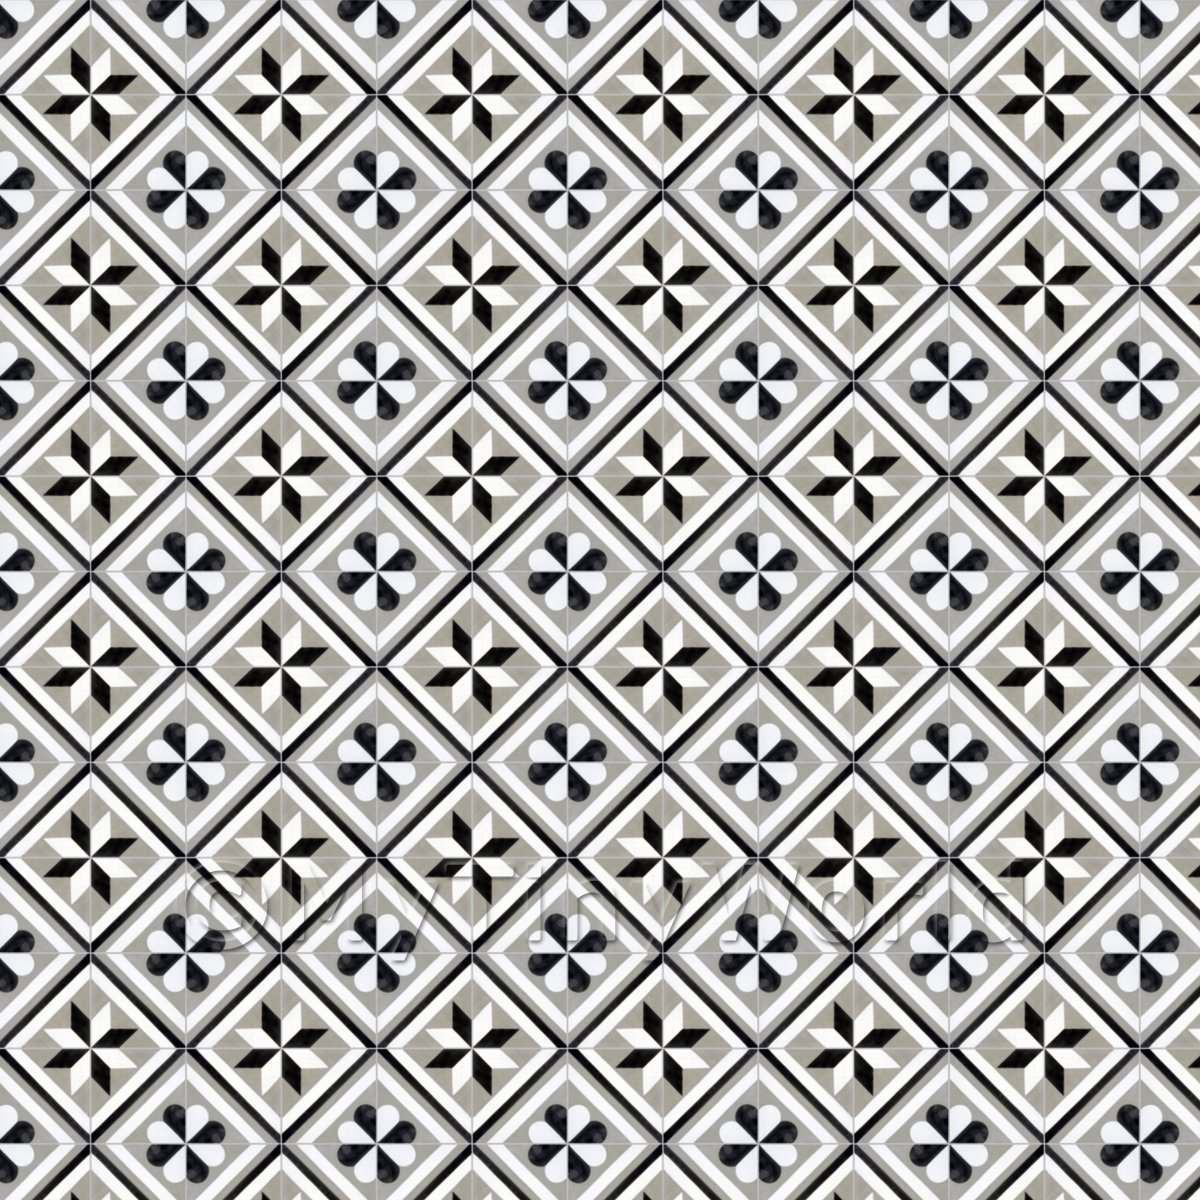 1:12th Charcoal And Grey Geometric Design Tile Sheet With Dark Grout 